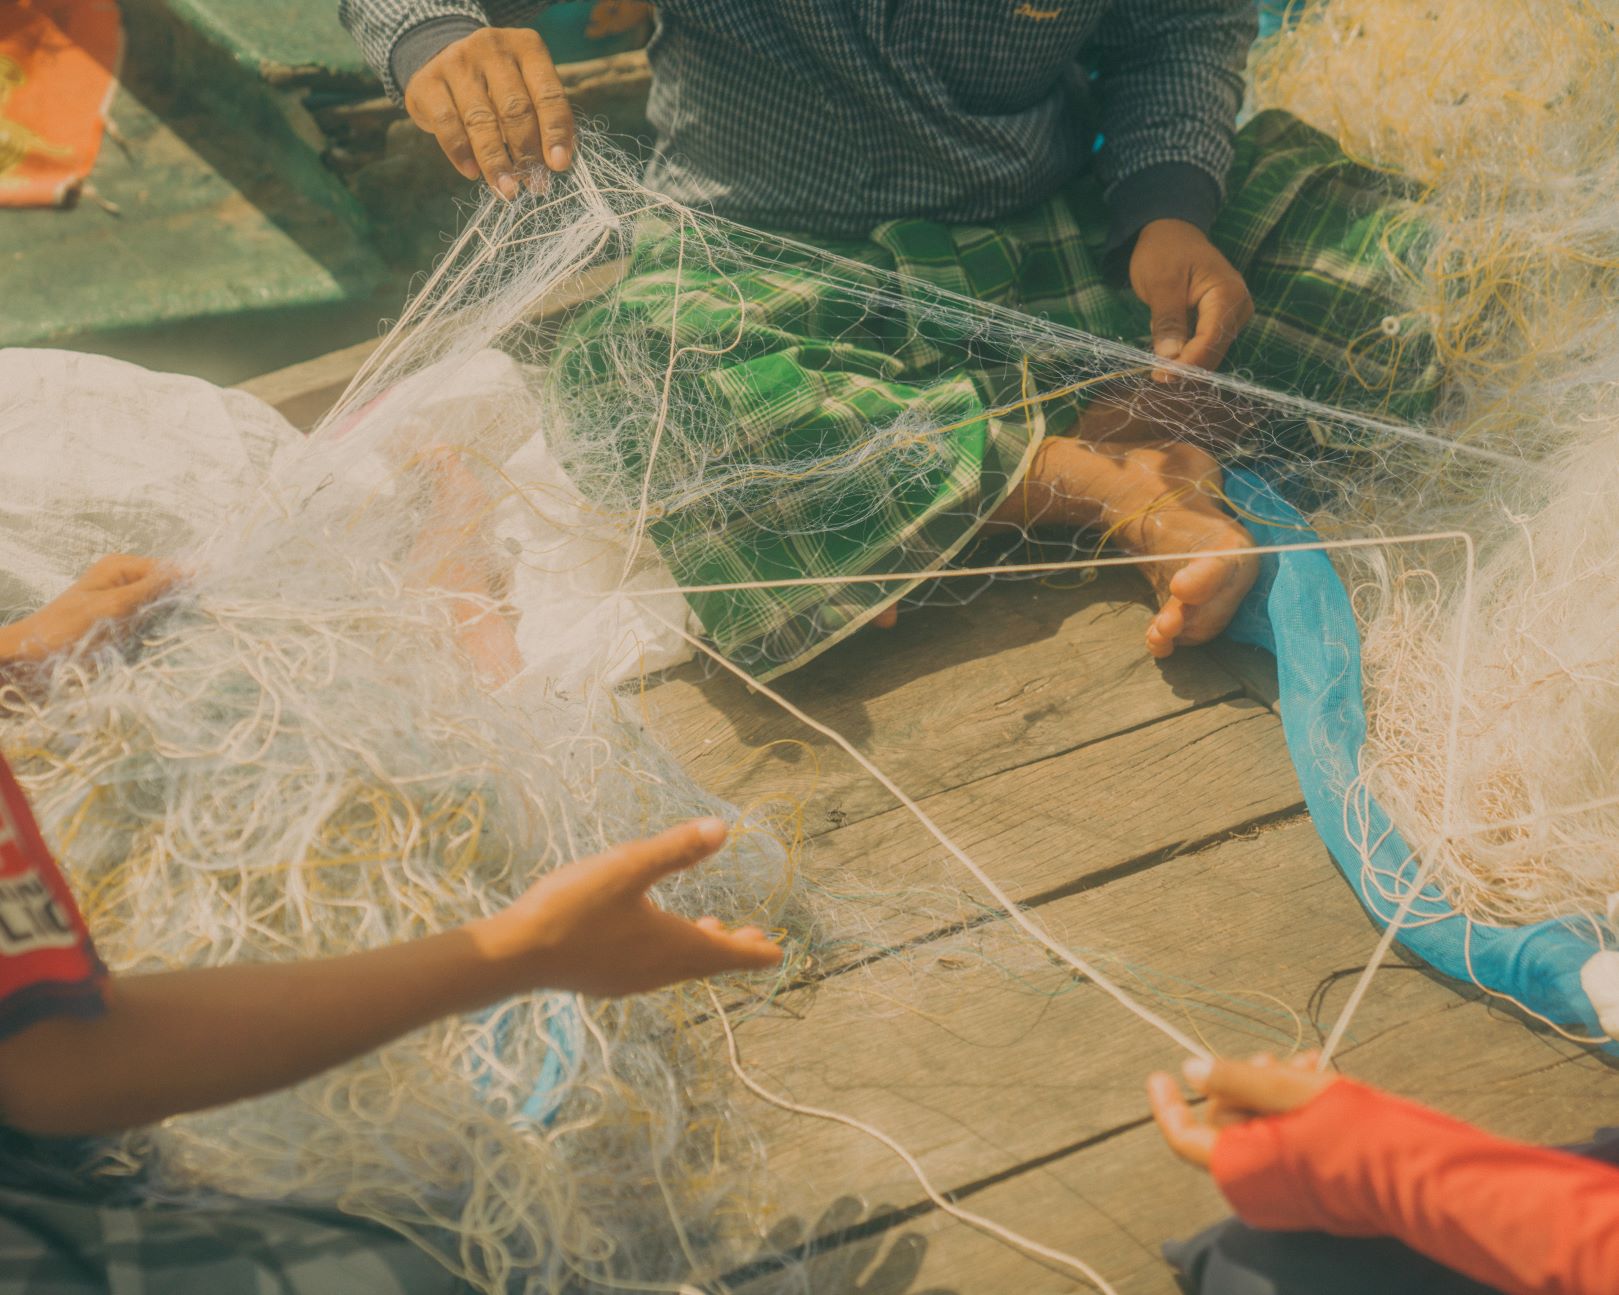 Fishermen untangling their fishing nets on the boat after a long day of fishing